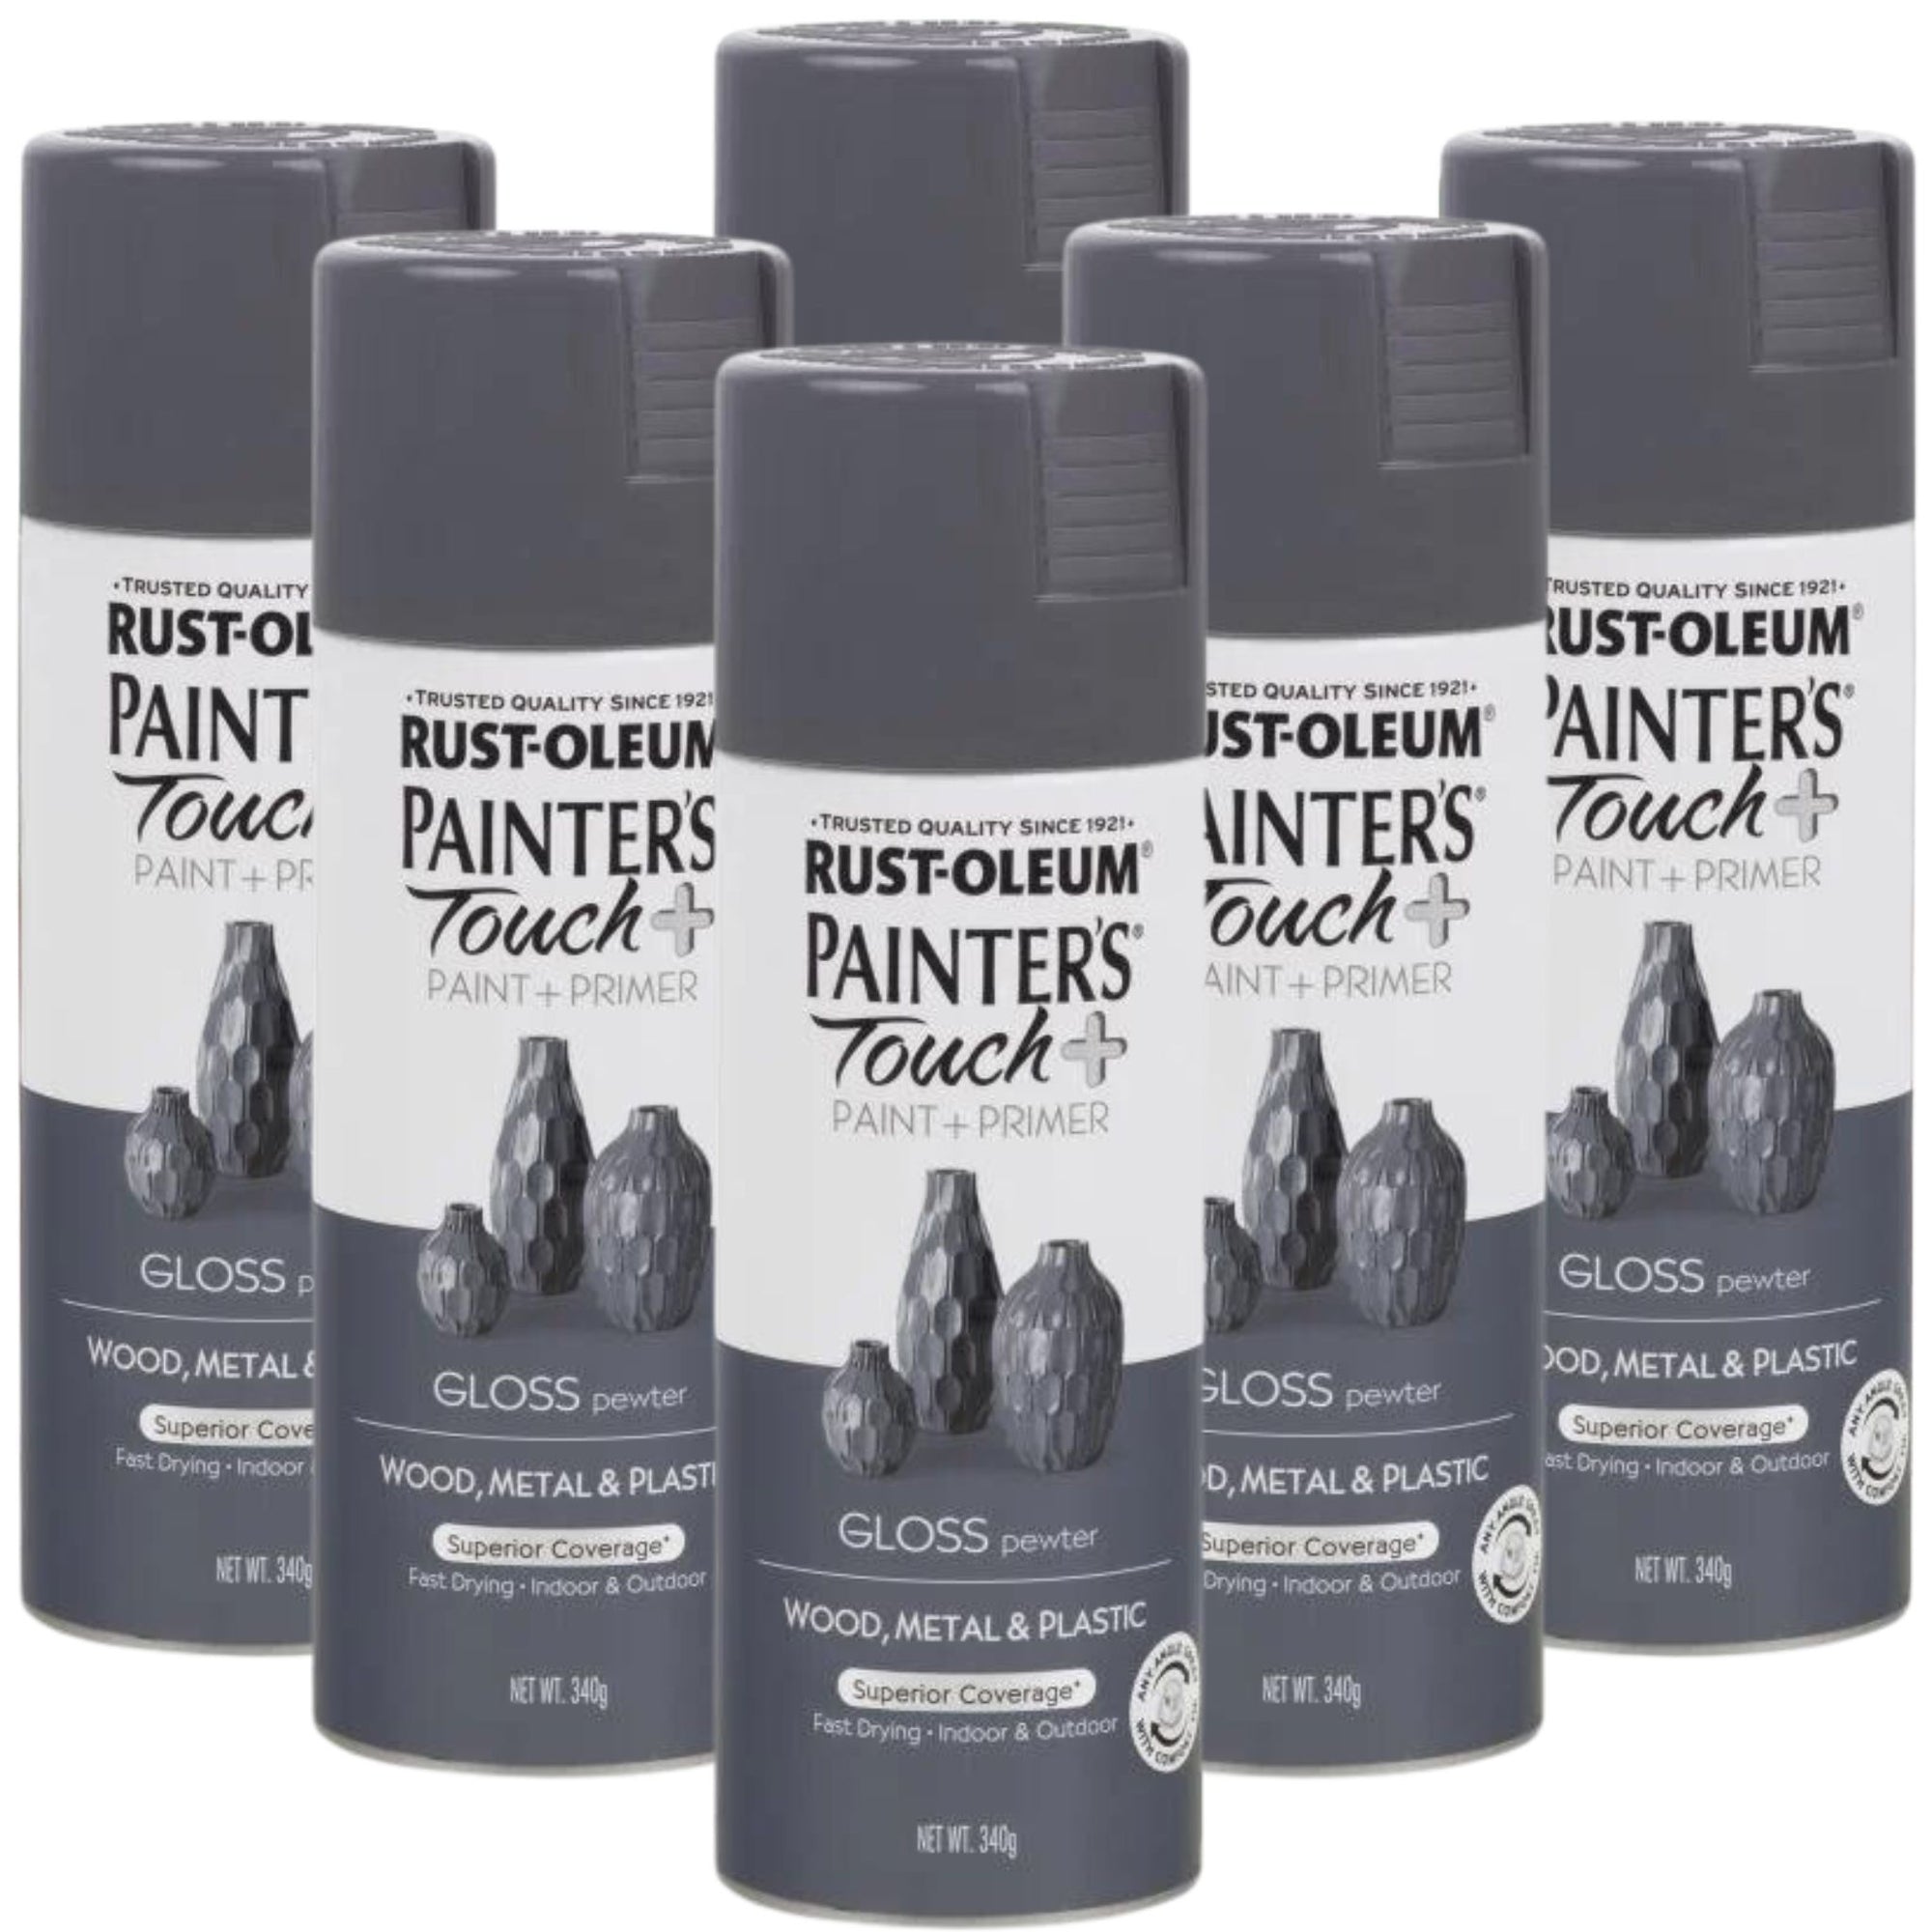 Rust-Oleum 300397 Painter's Touch Paint & Primer Spray Paint | GLOSS PEWTER (6 Cans0 - South East Clearance Centre